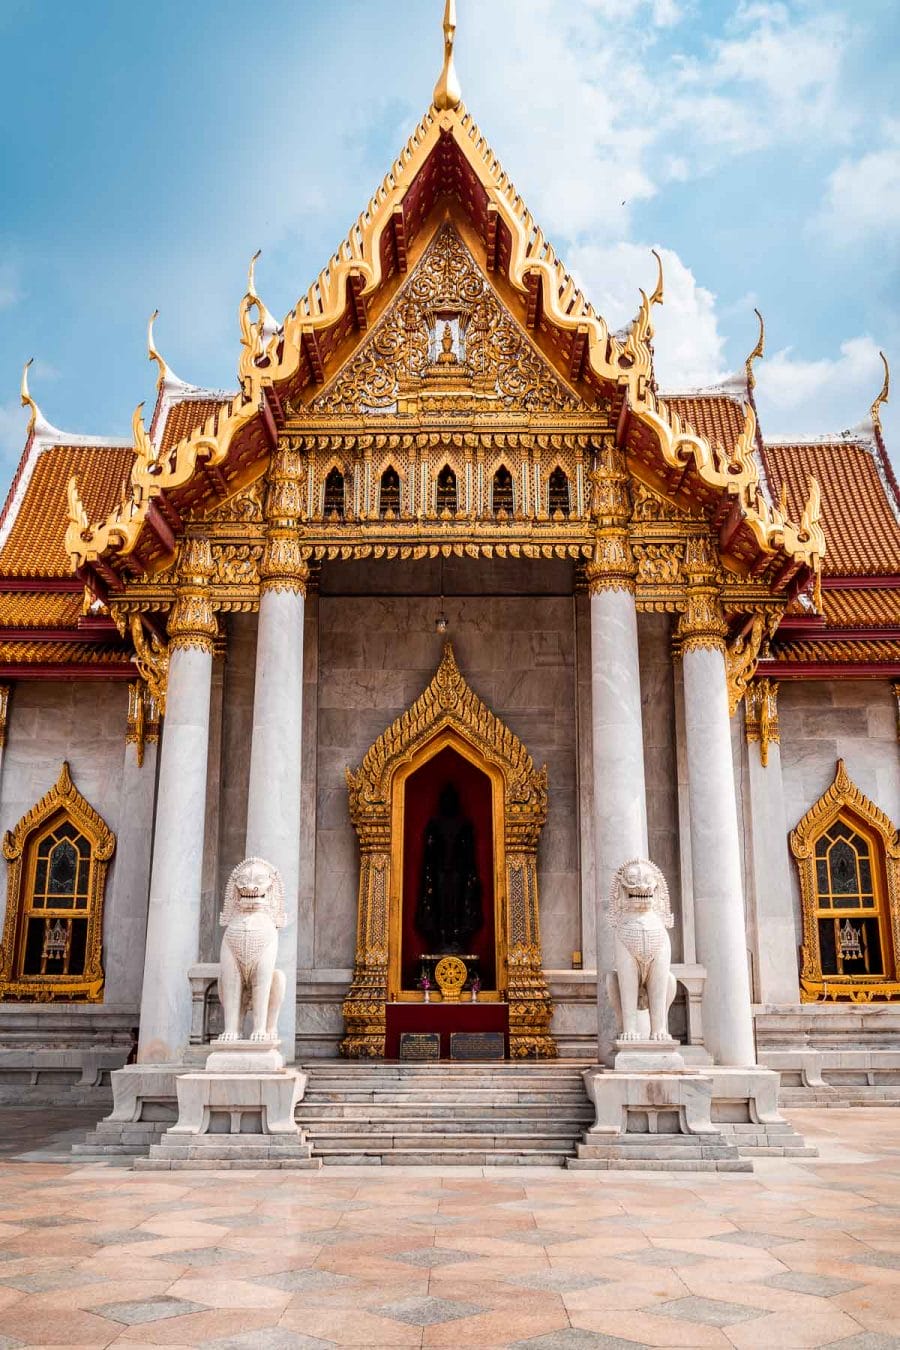 Wat Benchamabophit, the Marble Temple in Bangkok